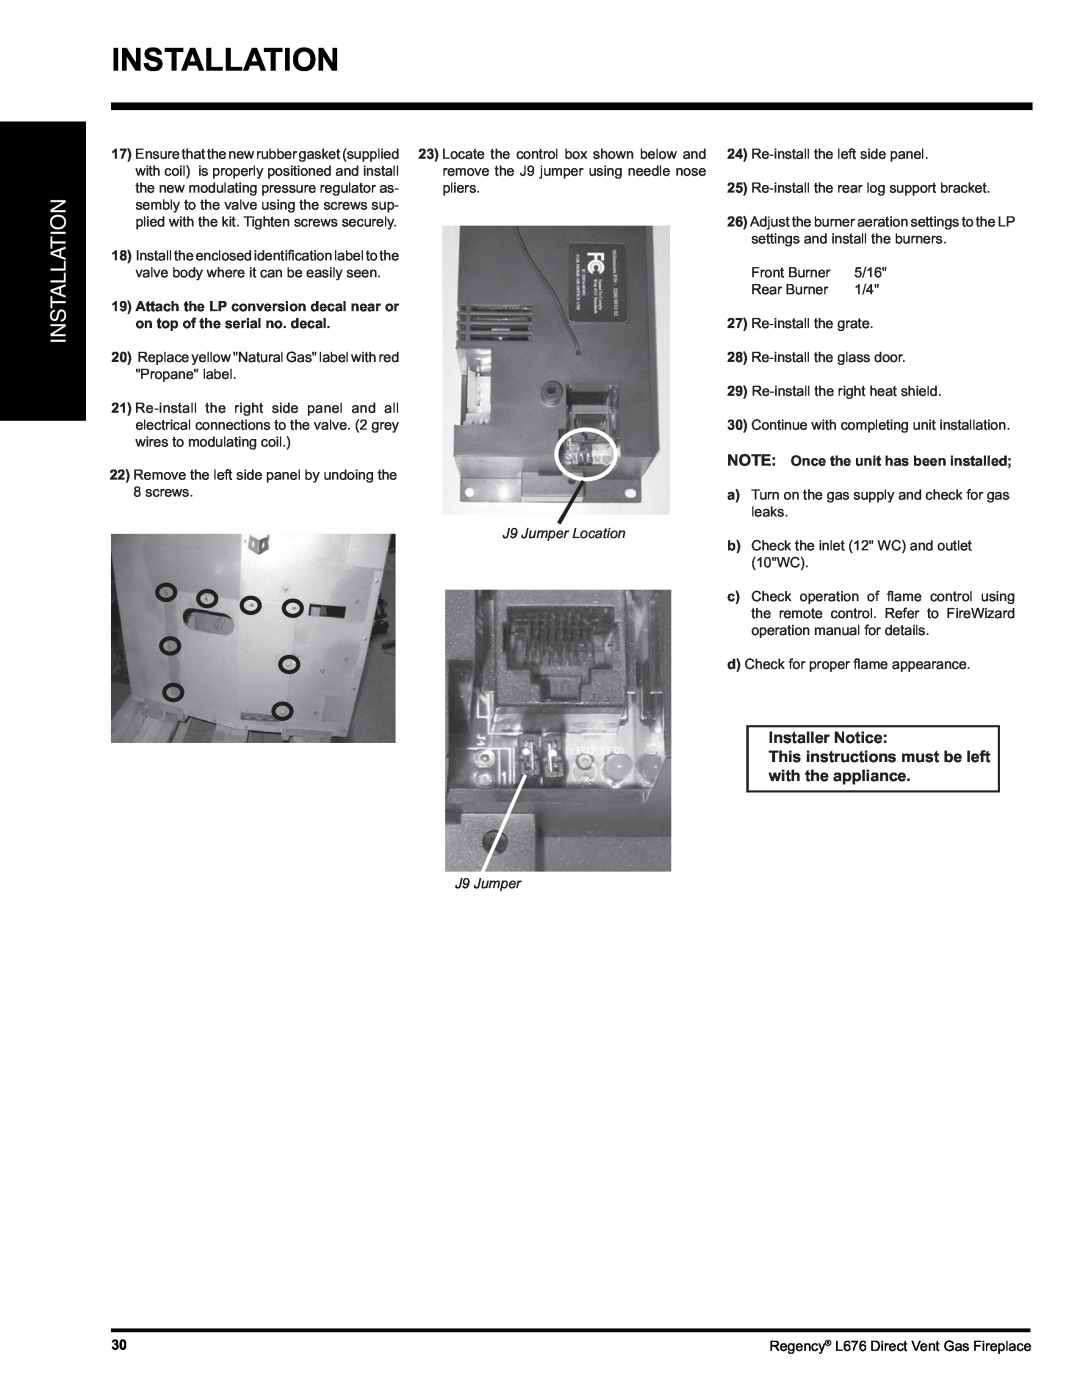 Regency L676 Installation, Installer Notice, This instructions must be left with the appliance, J9 Jumper Location 